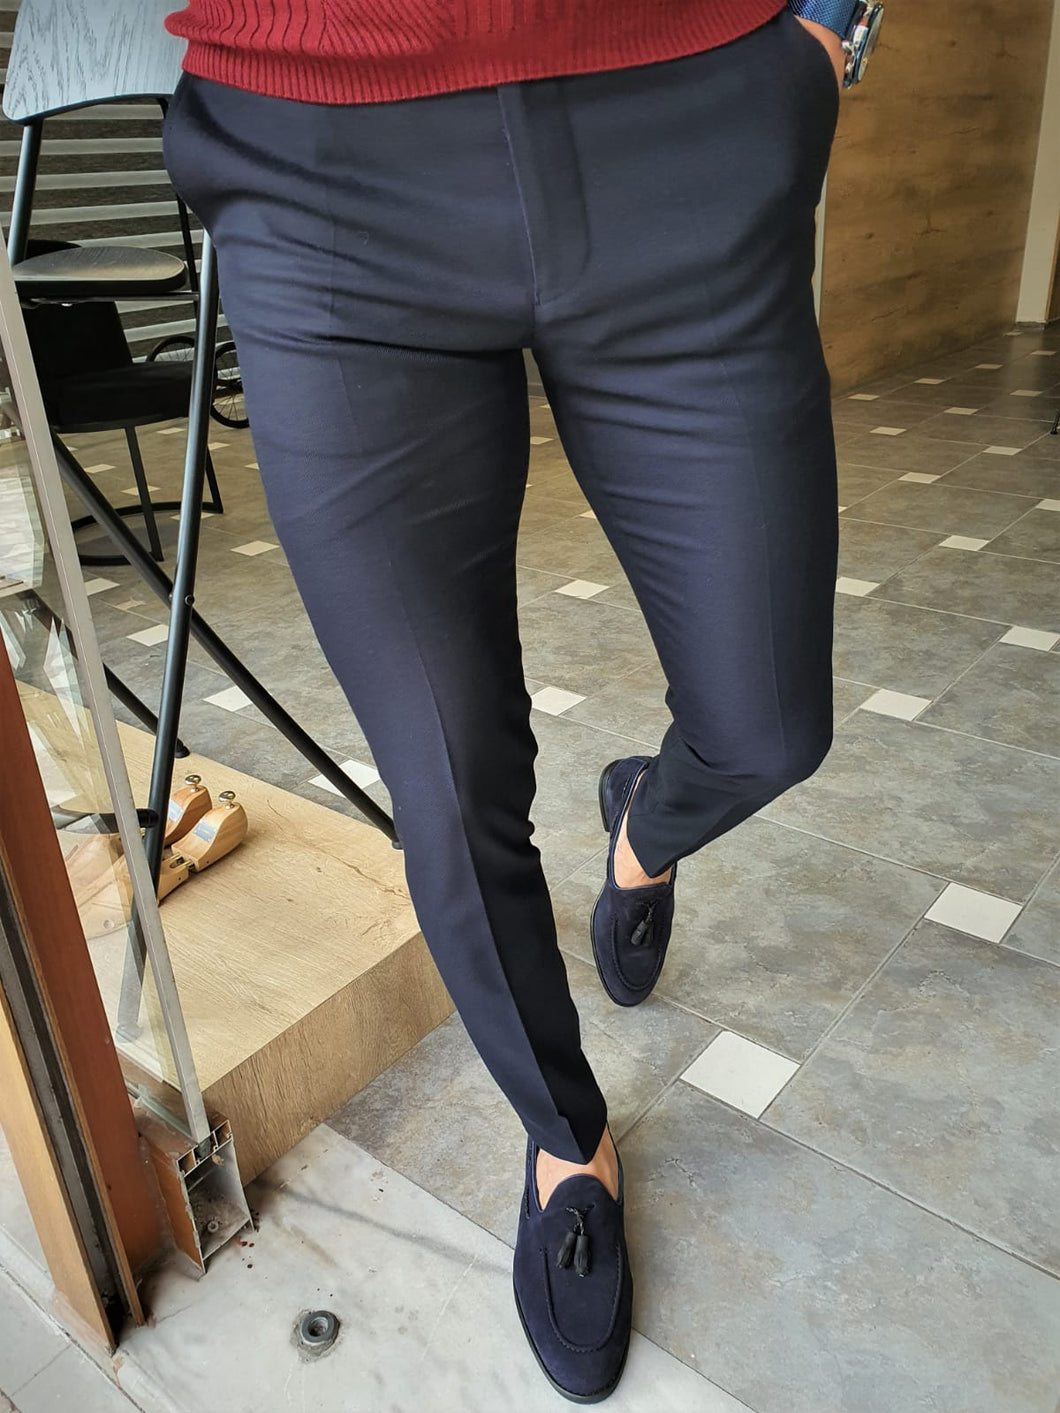 Harrison Slim Fit Special Edition Navy Pants